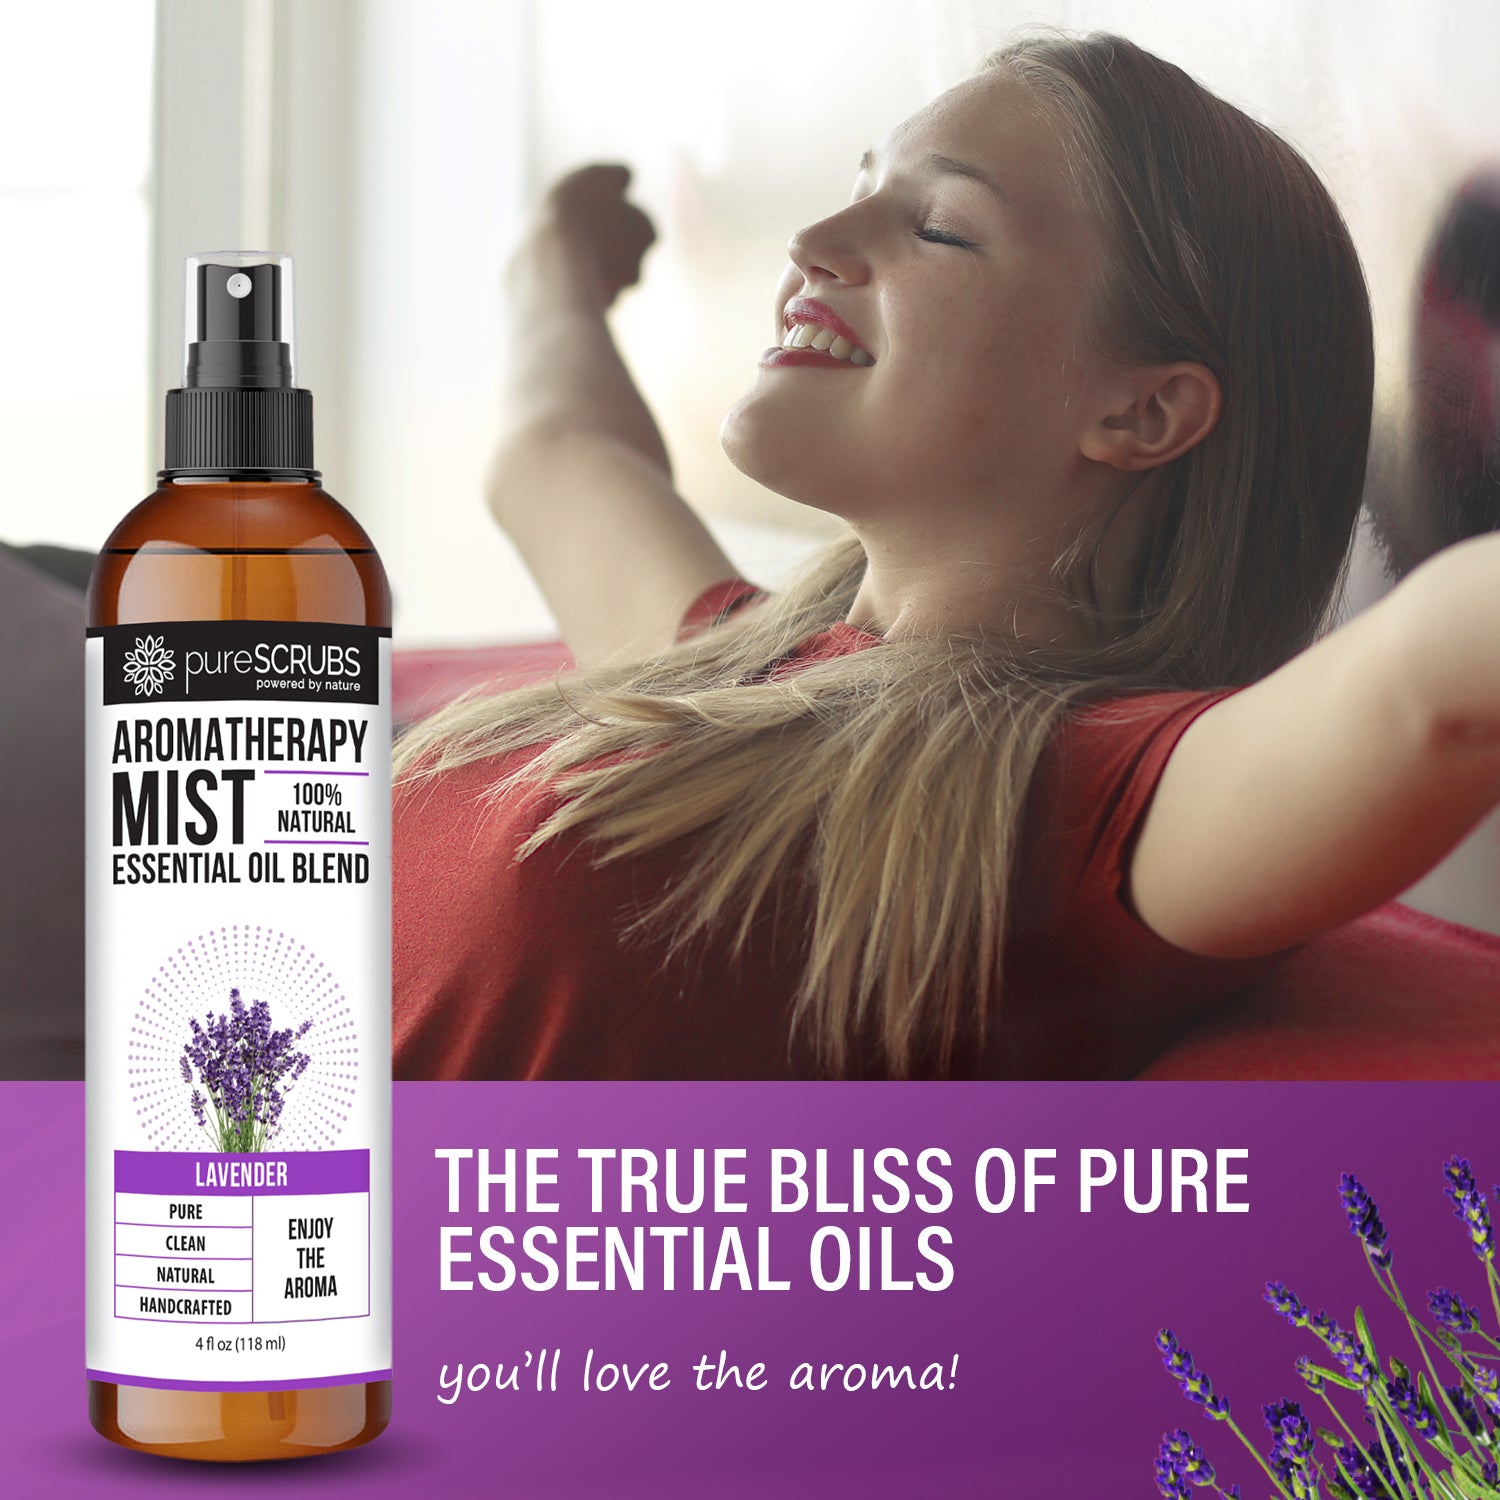 Lavender Aromatherapy Mist - 100% Natural Essential Oil Blend for Room, Body, Linens